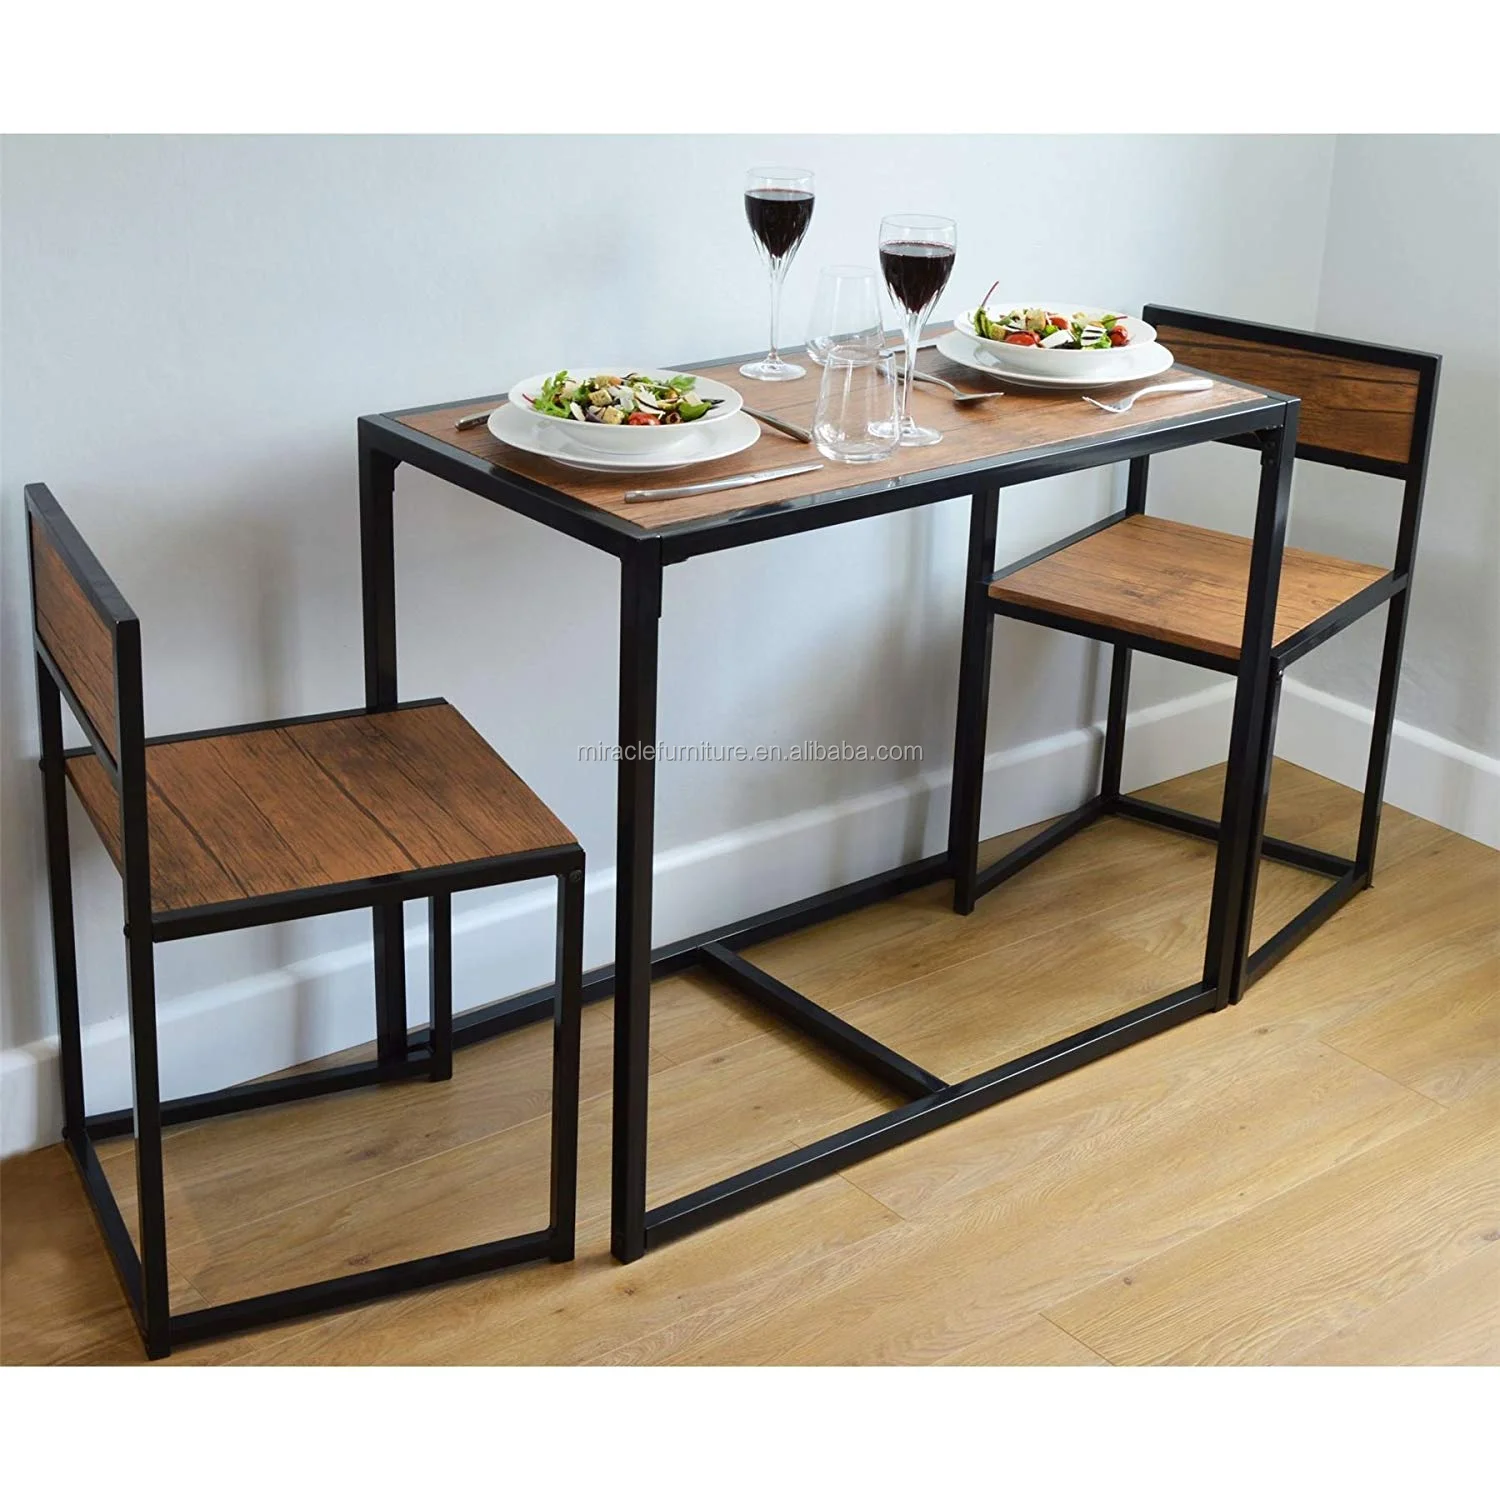 Factory Price Compact Dining Table Set And Dining Chairs For 2 People Buy Compact Dining Table And Chair